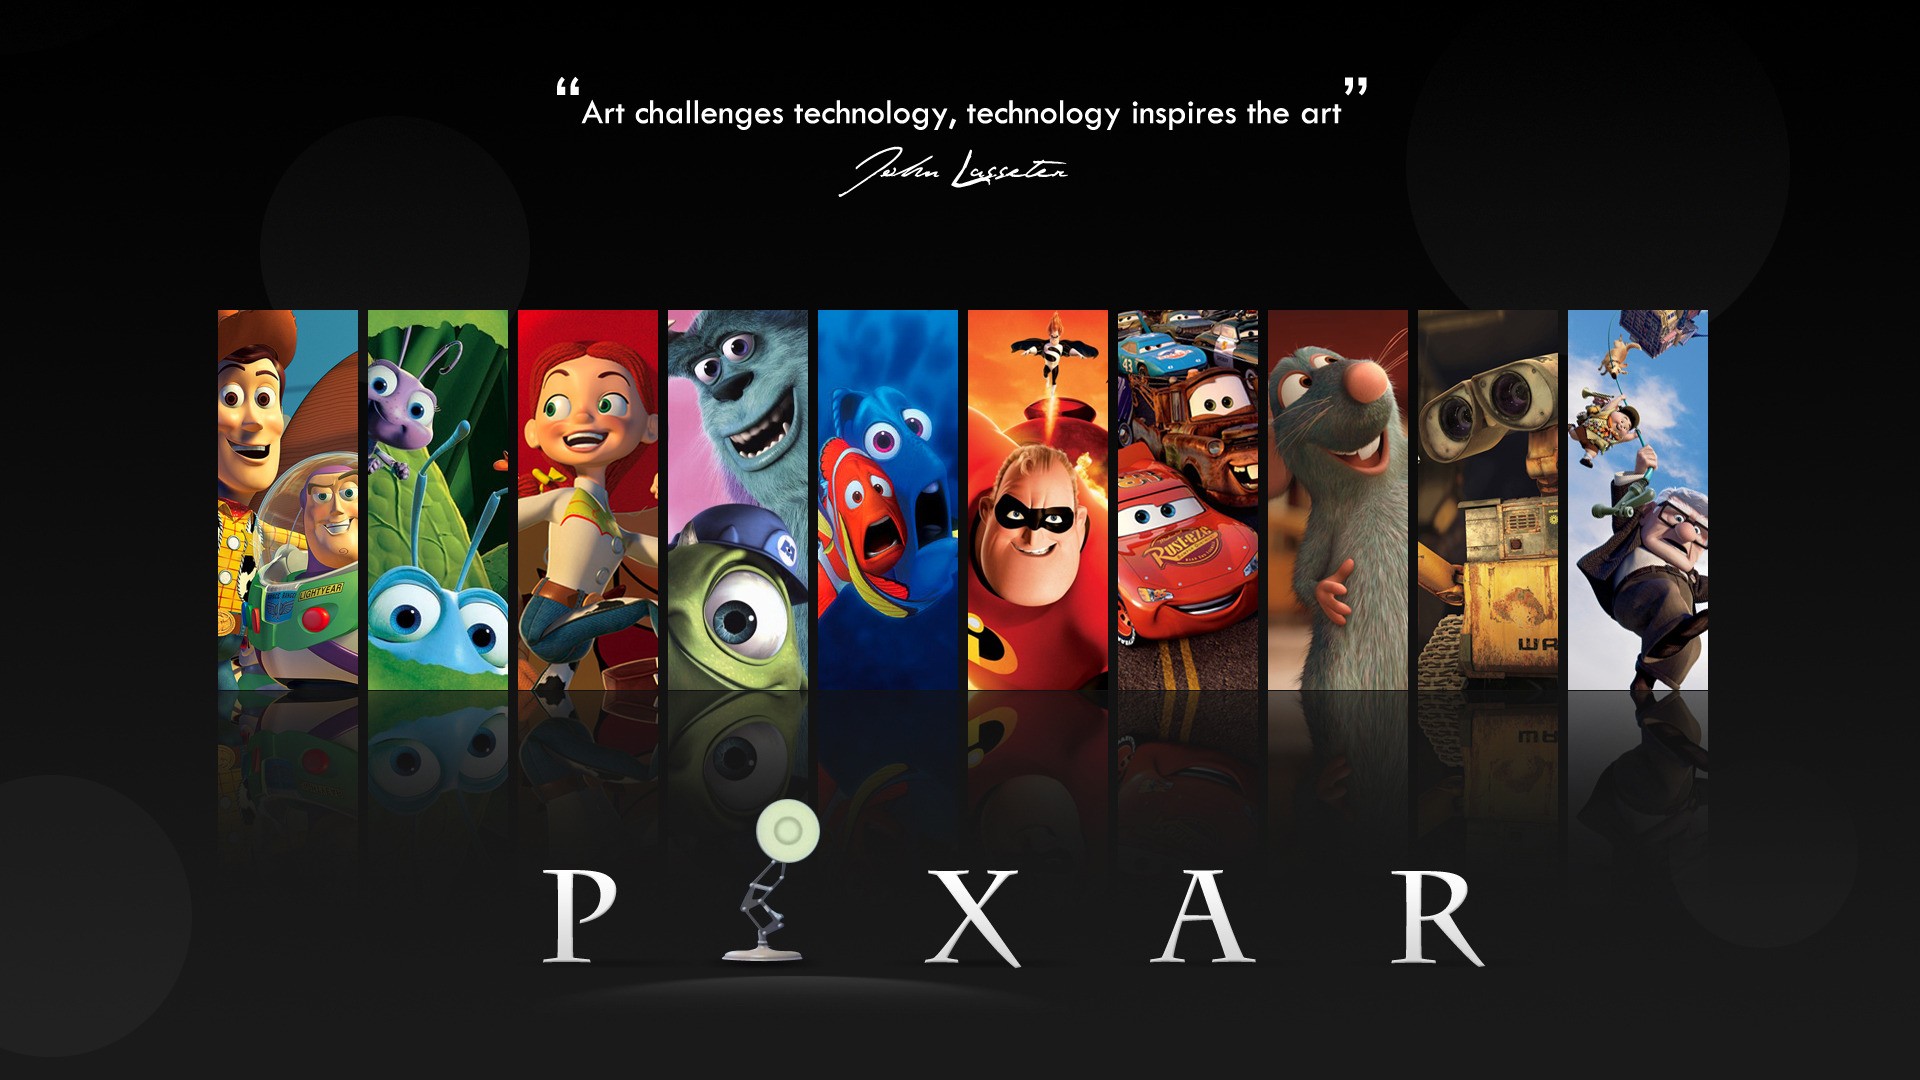 Movies Animated Movies Disney Pixar Collage Simple Background Toy Story A Bugs Life Car WALL E 1920x1080